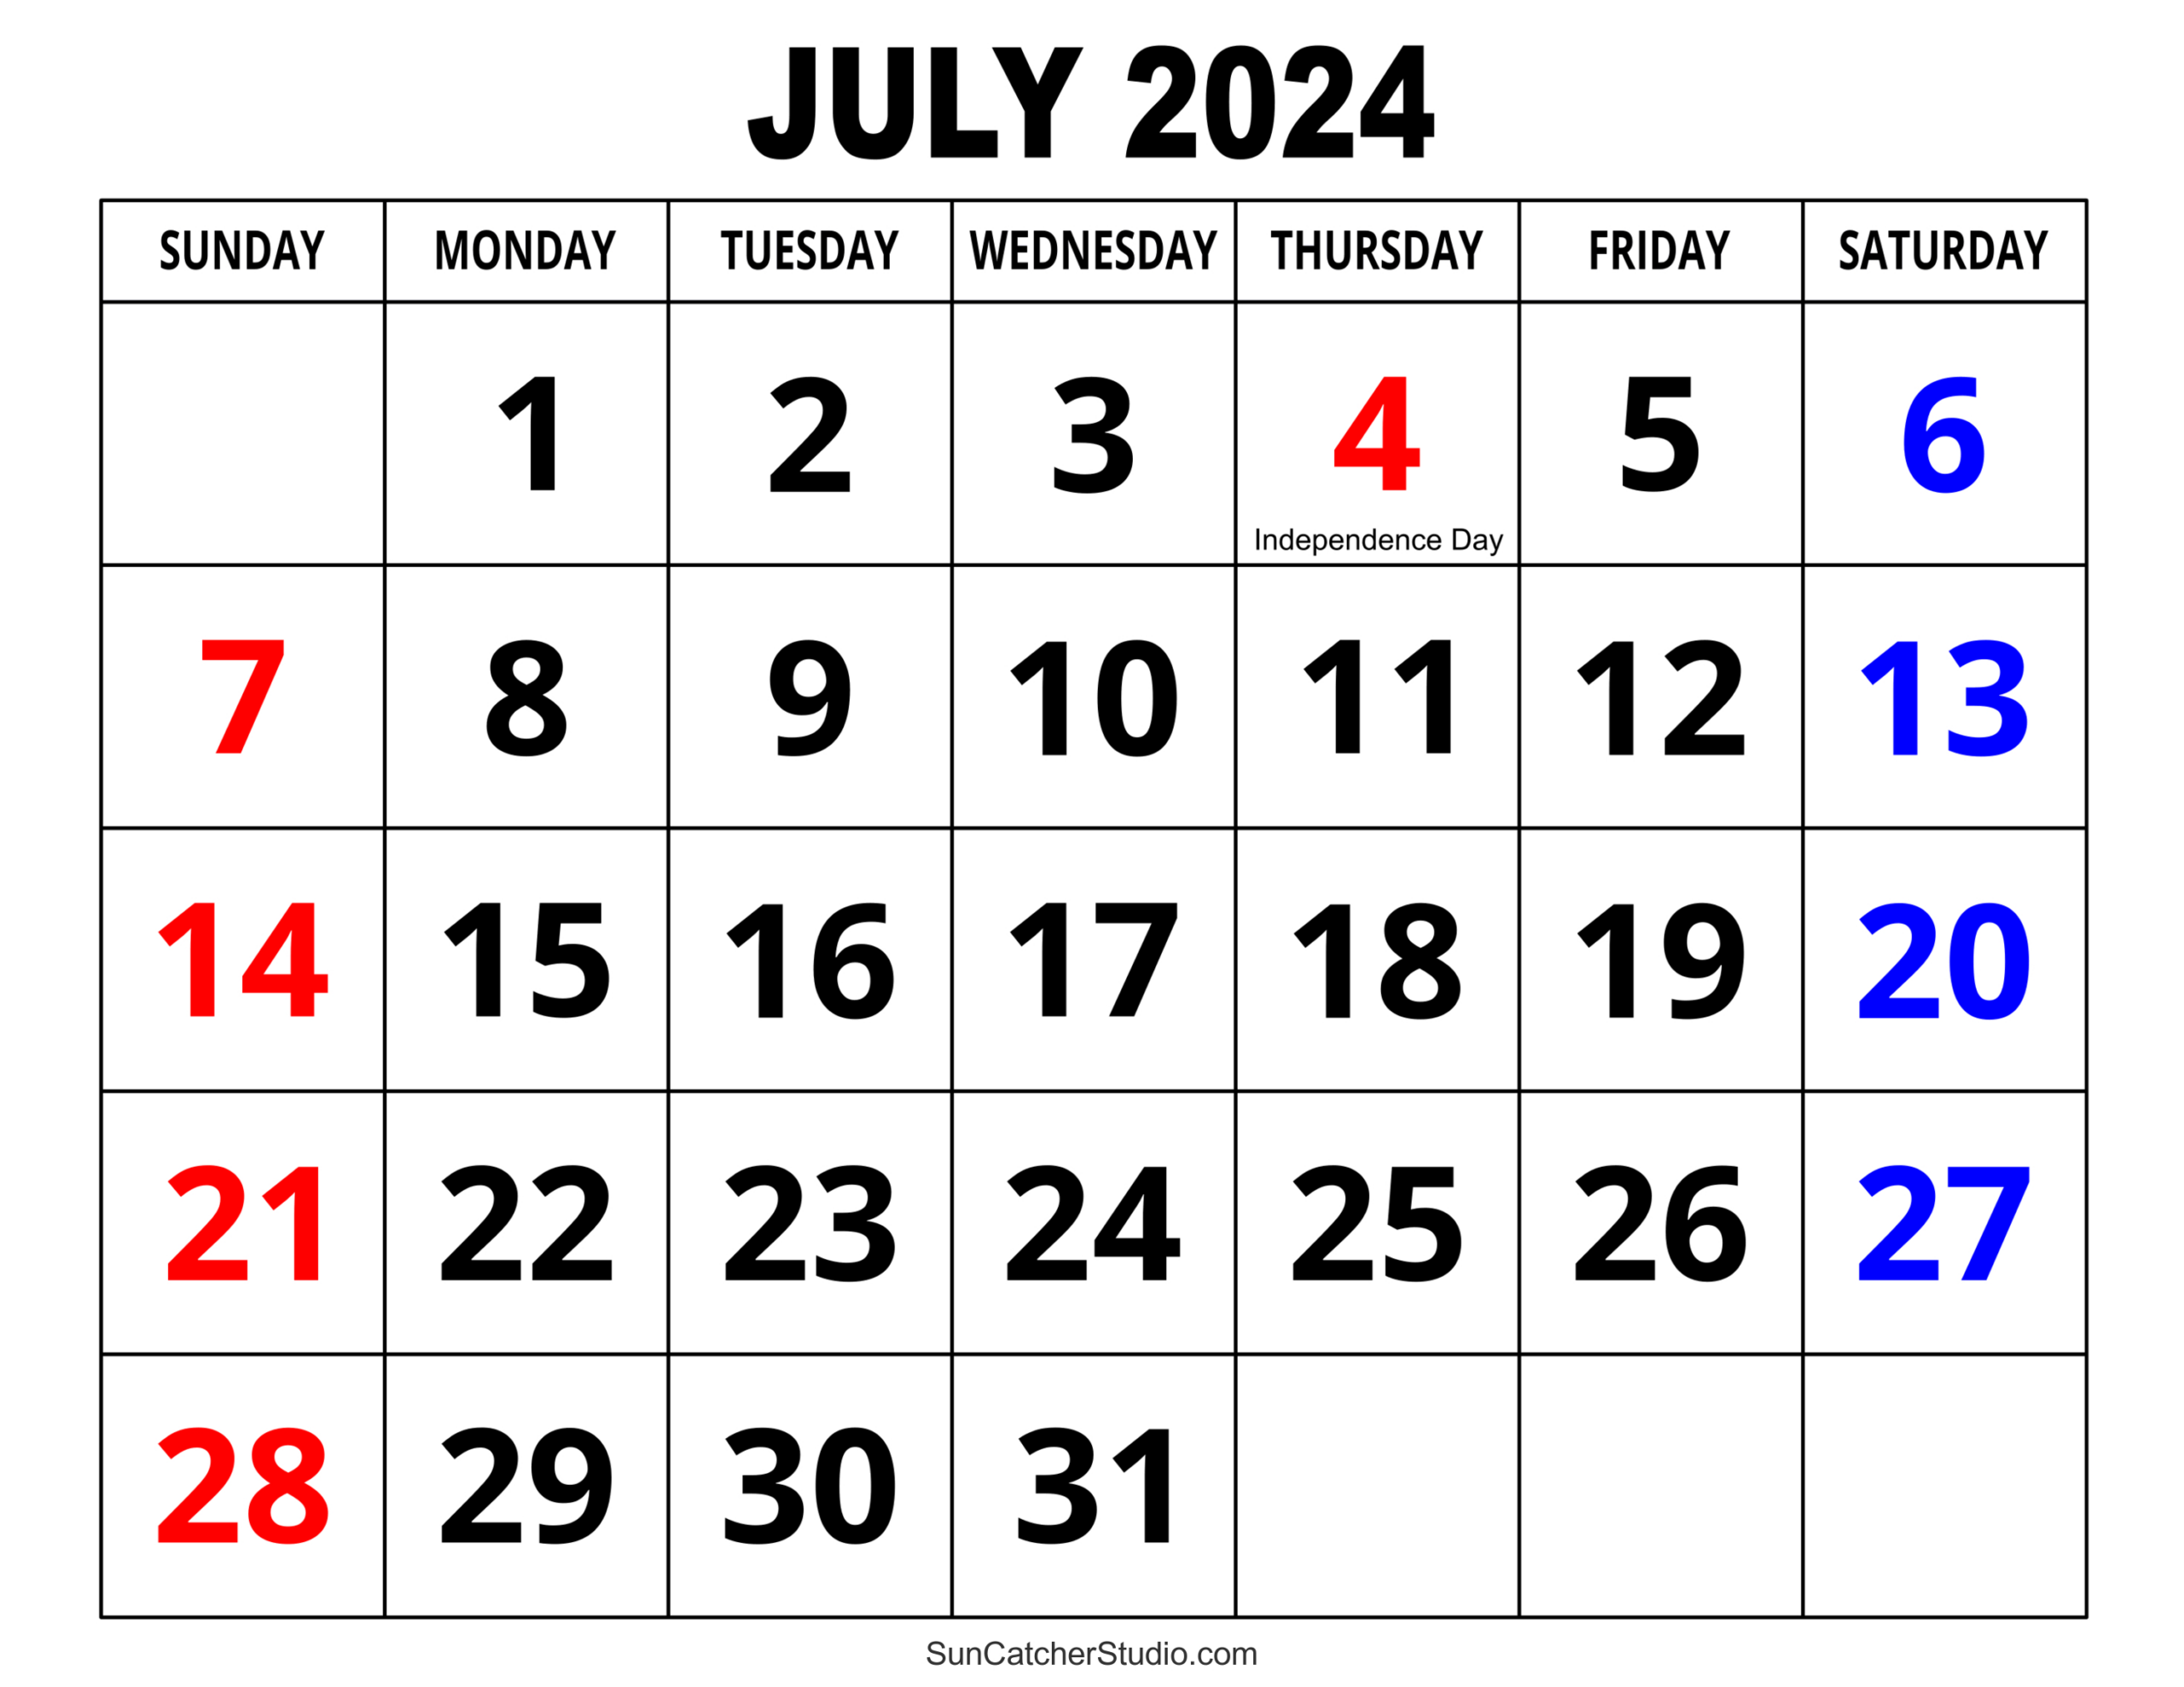 July 2024 Calendar (Free Printable) – Diy Projects, Patterns | 26 July 2024 Calendar Printable